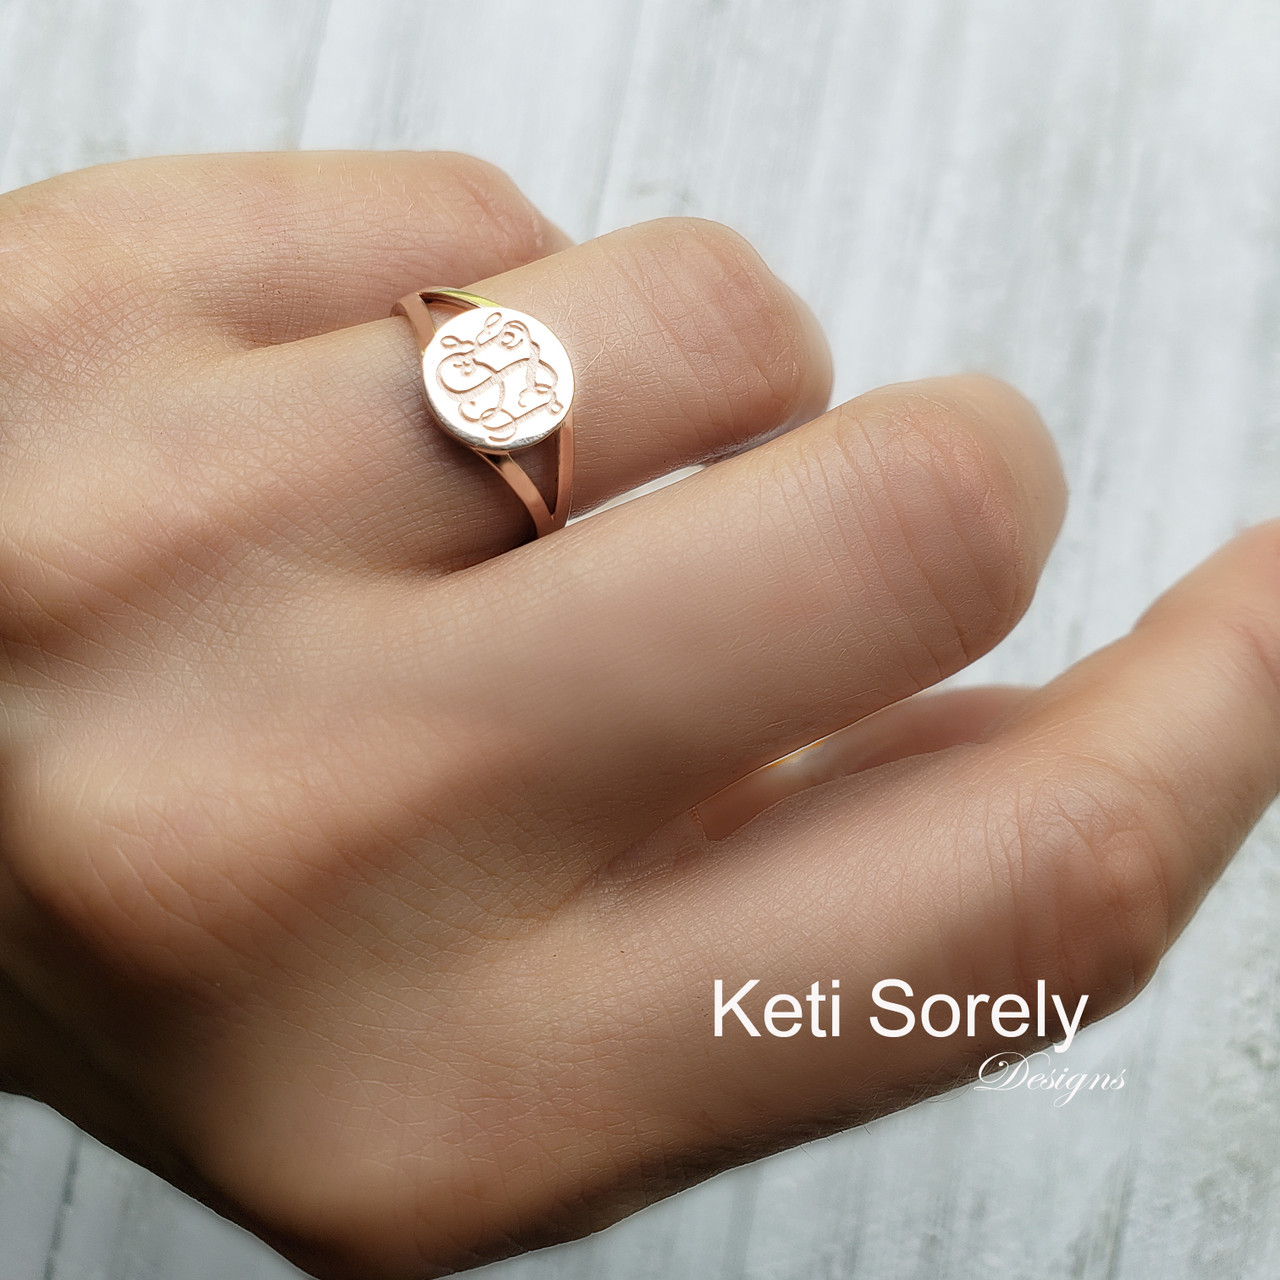 Personalized signet ring with monogram Initials - available in Sterling  Silver, 10K gold, 14K gold or 18K gold